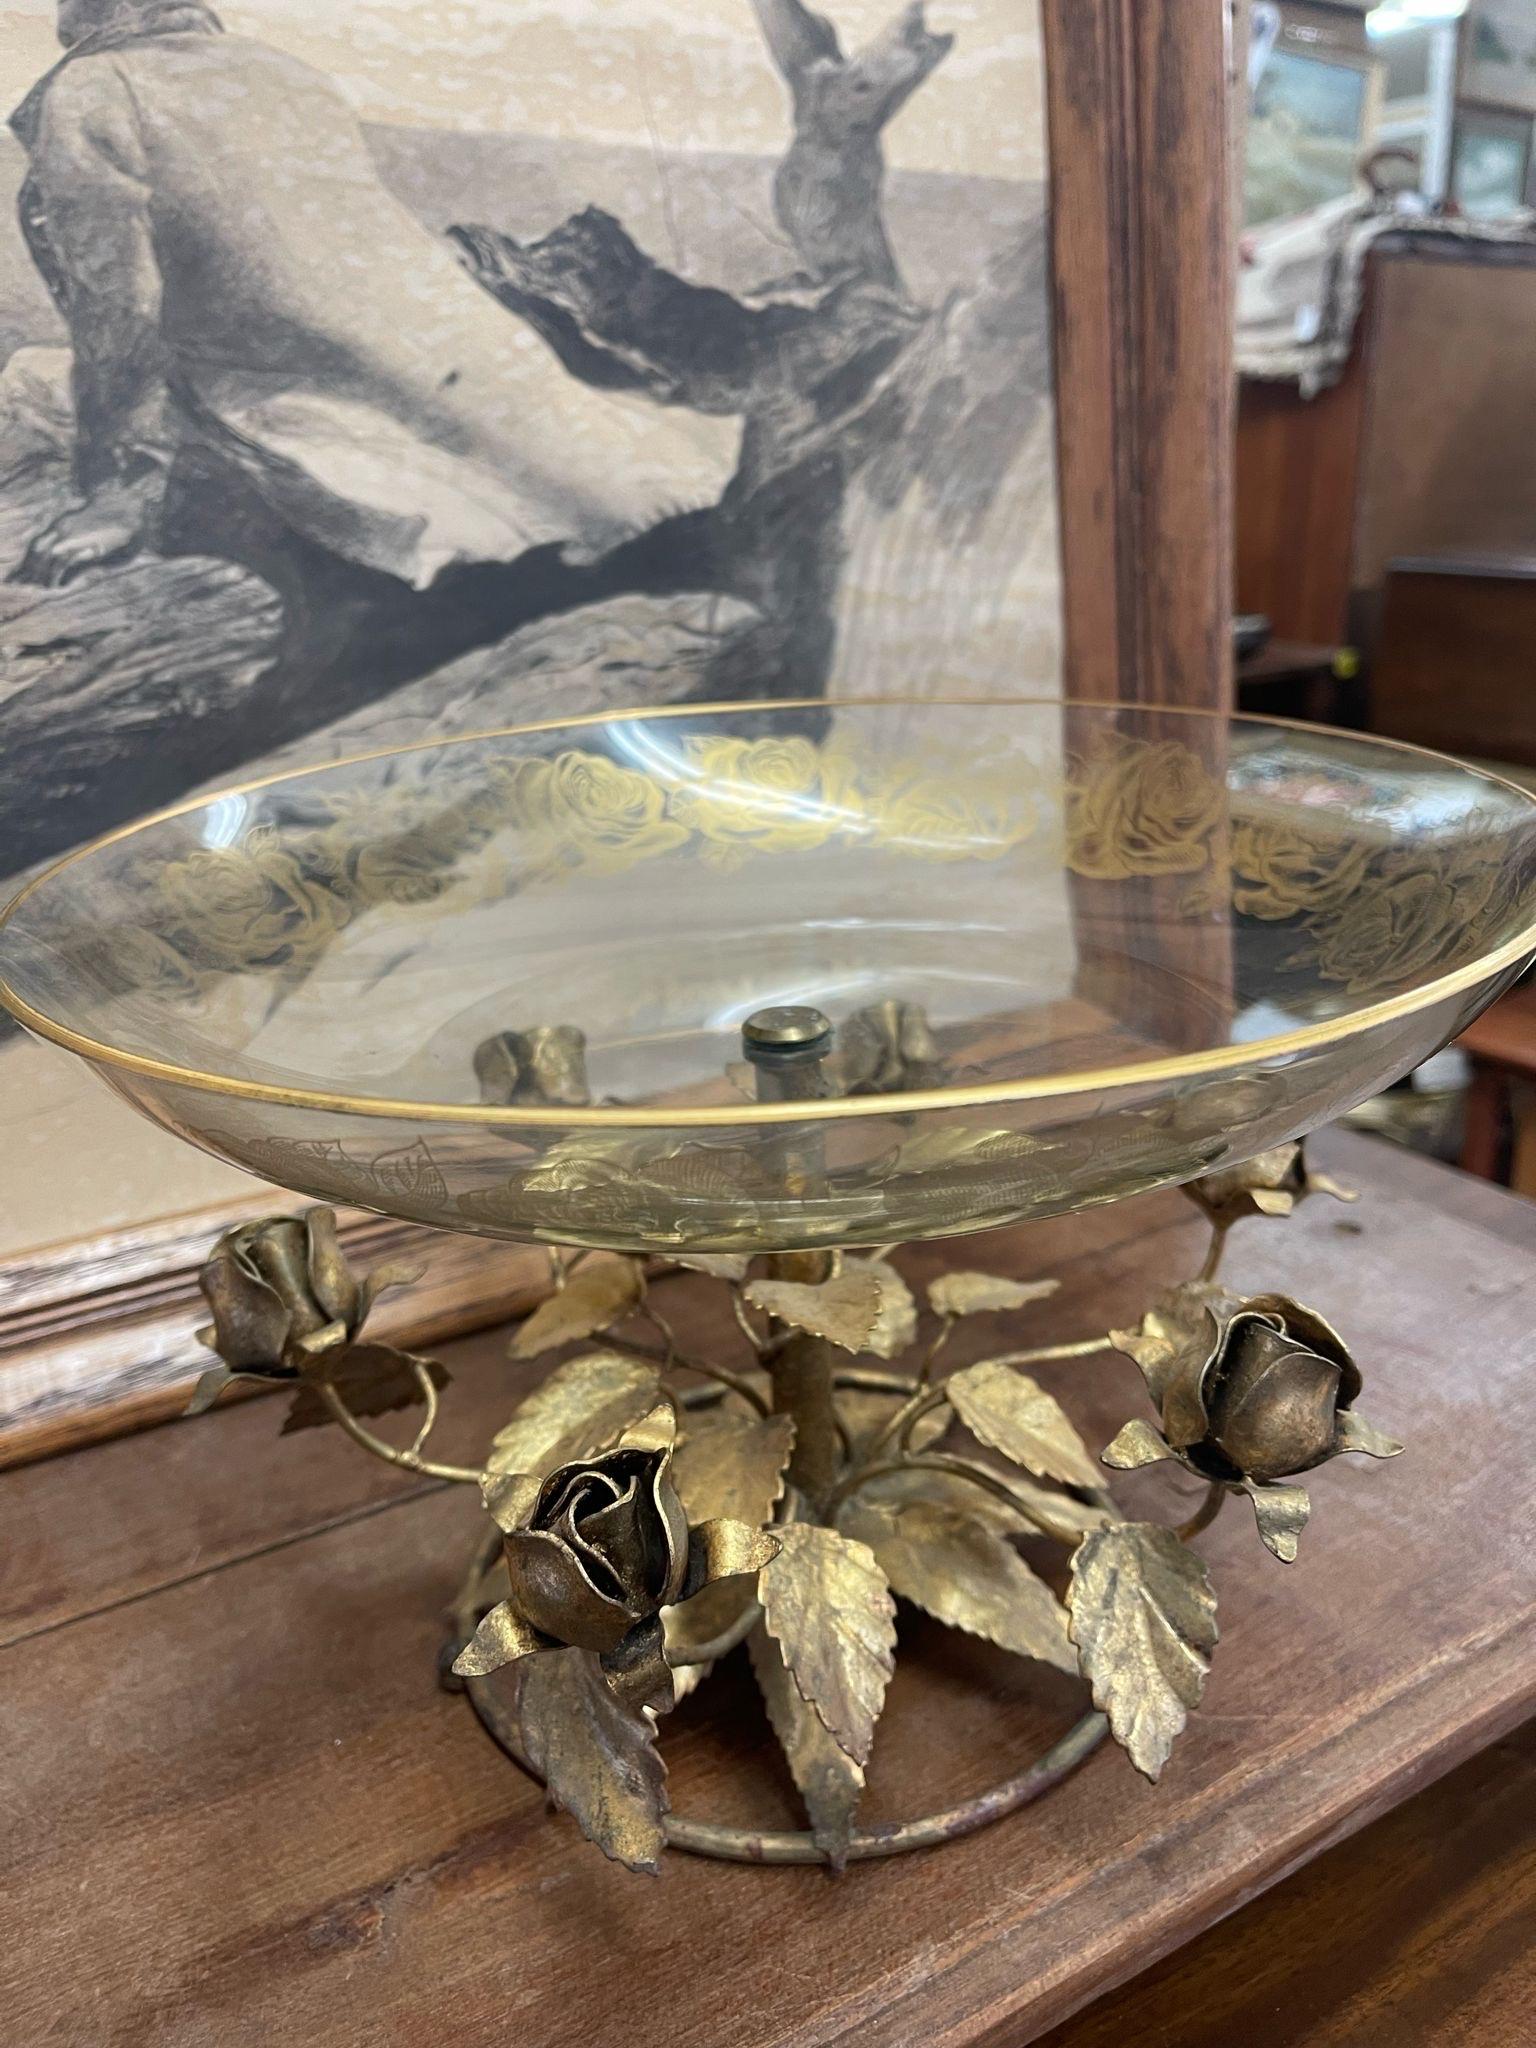 Metal Vintage Handmade Italian Bowl With Gifted Rose Sculpture Base. For Sale